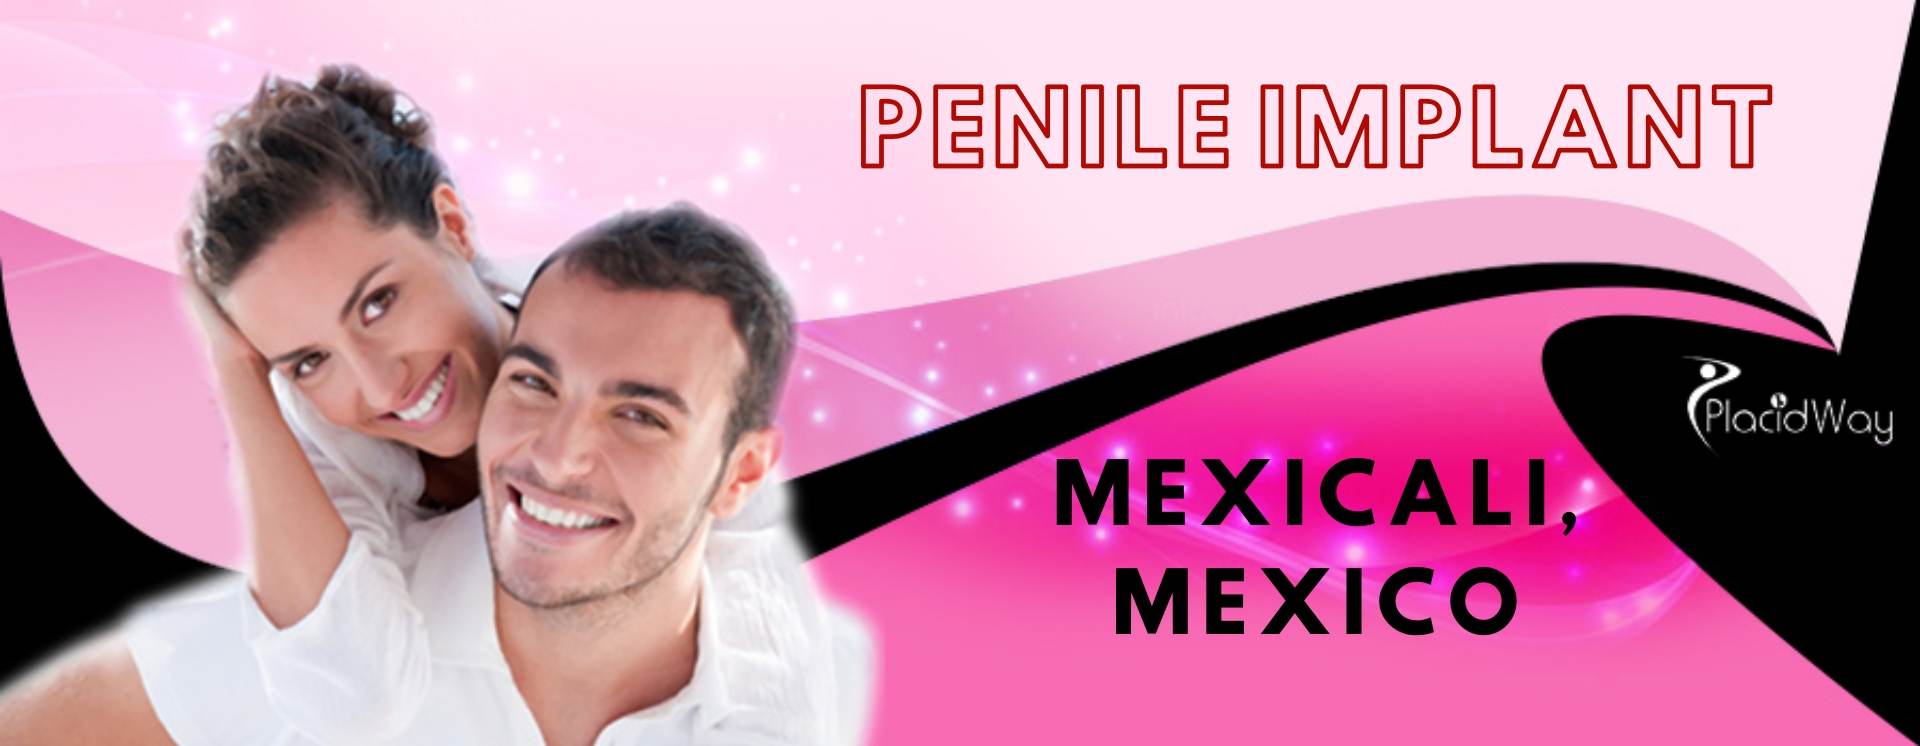 Penile Implant in Mexicali, Mexico